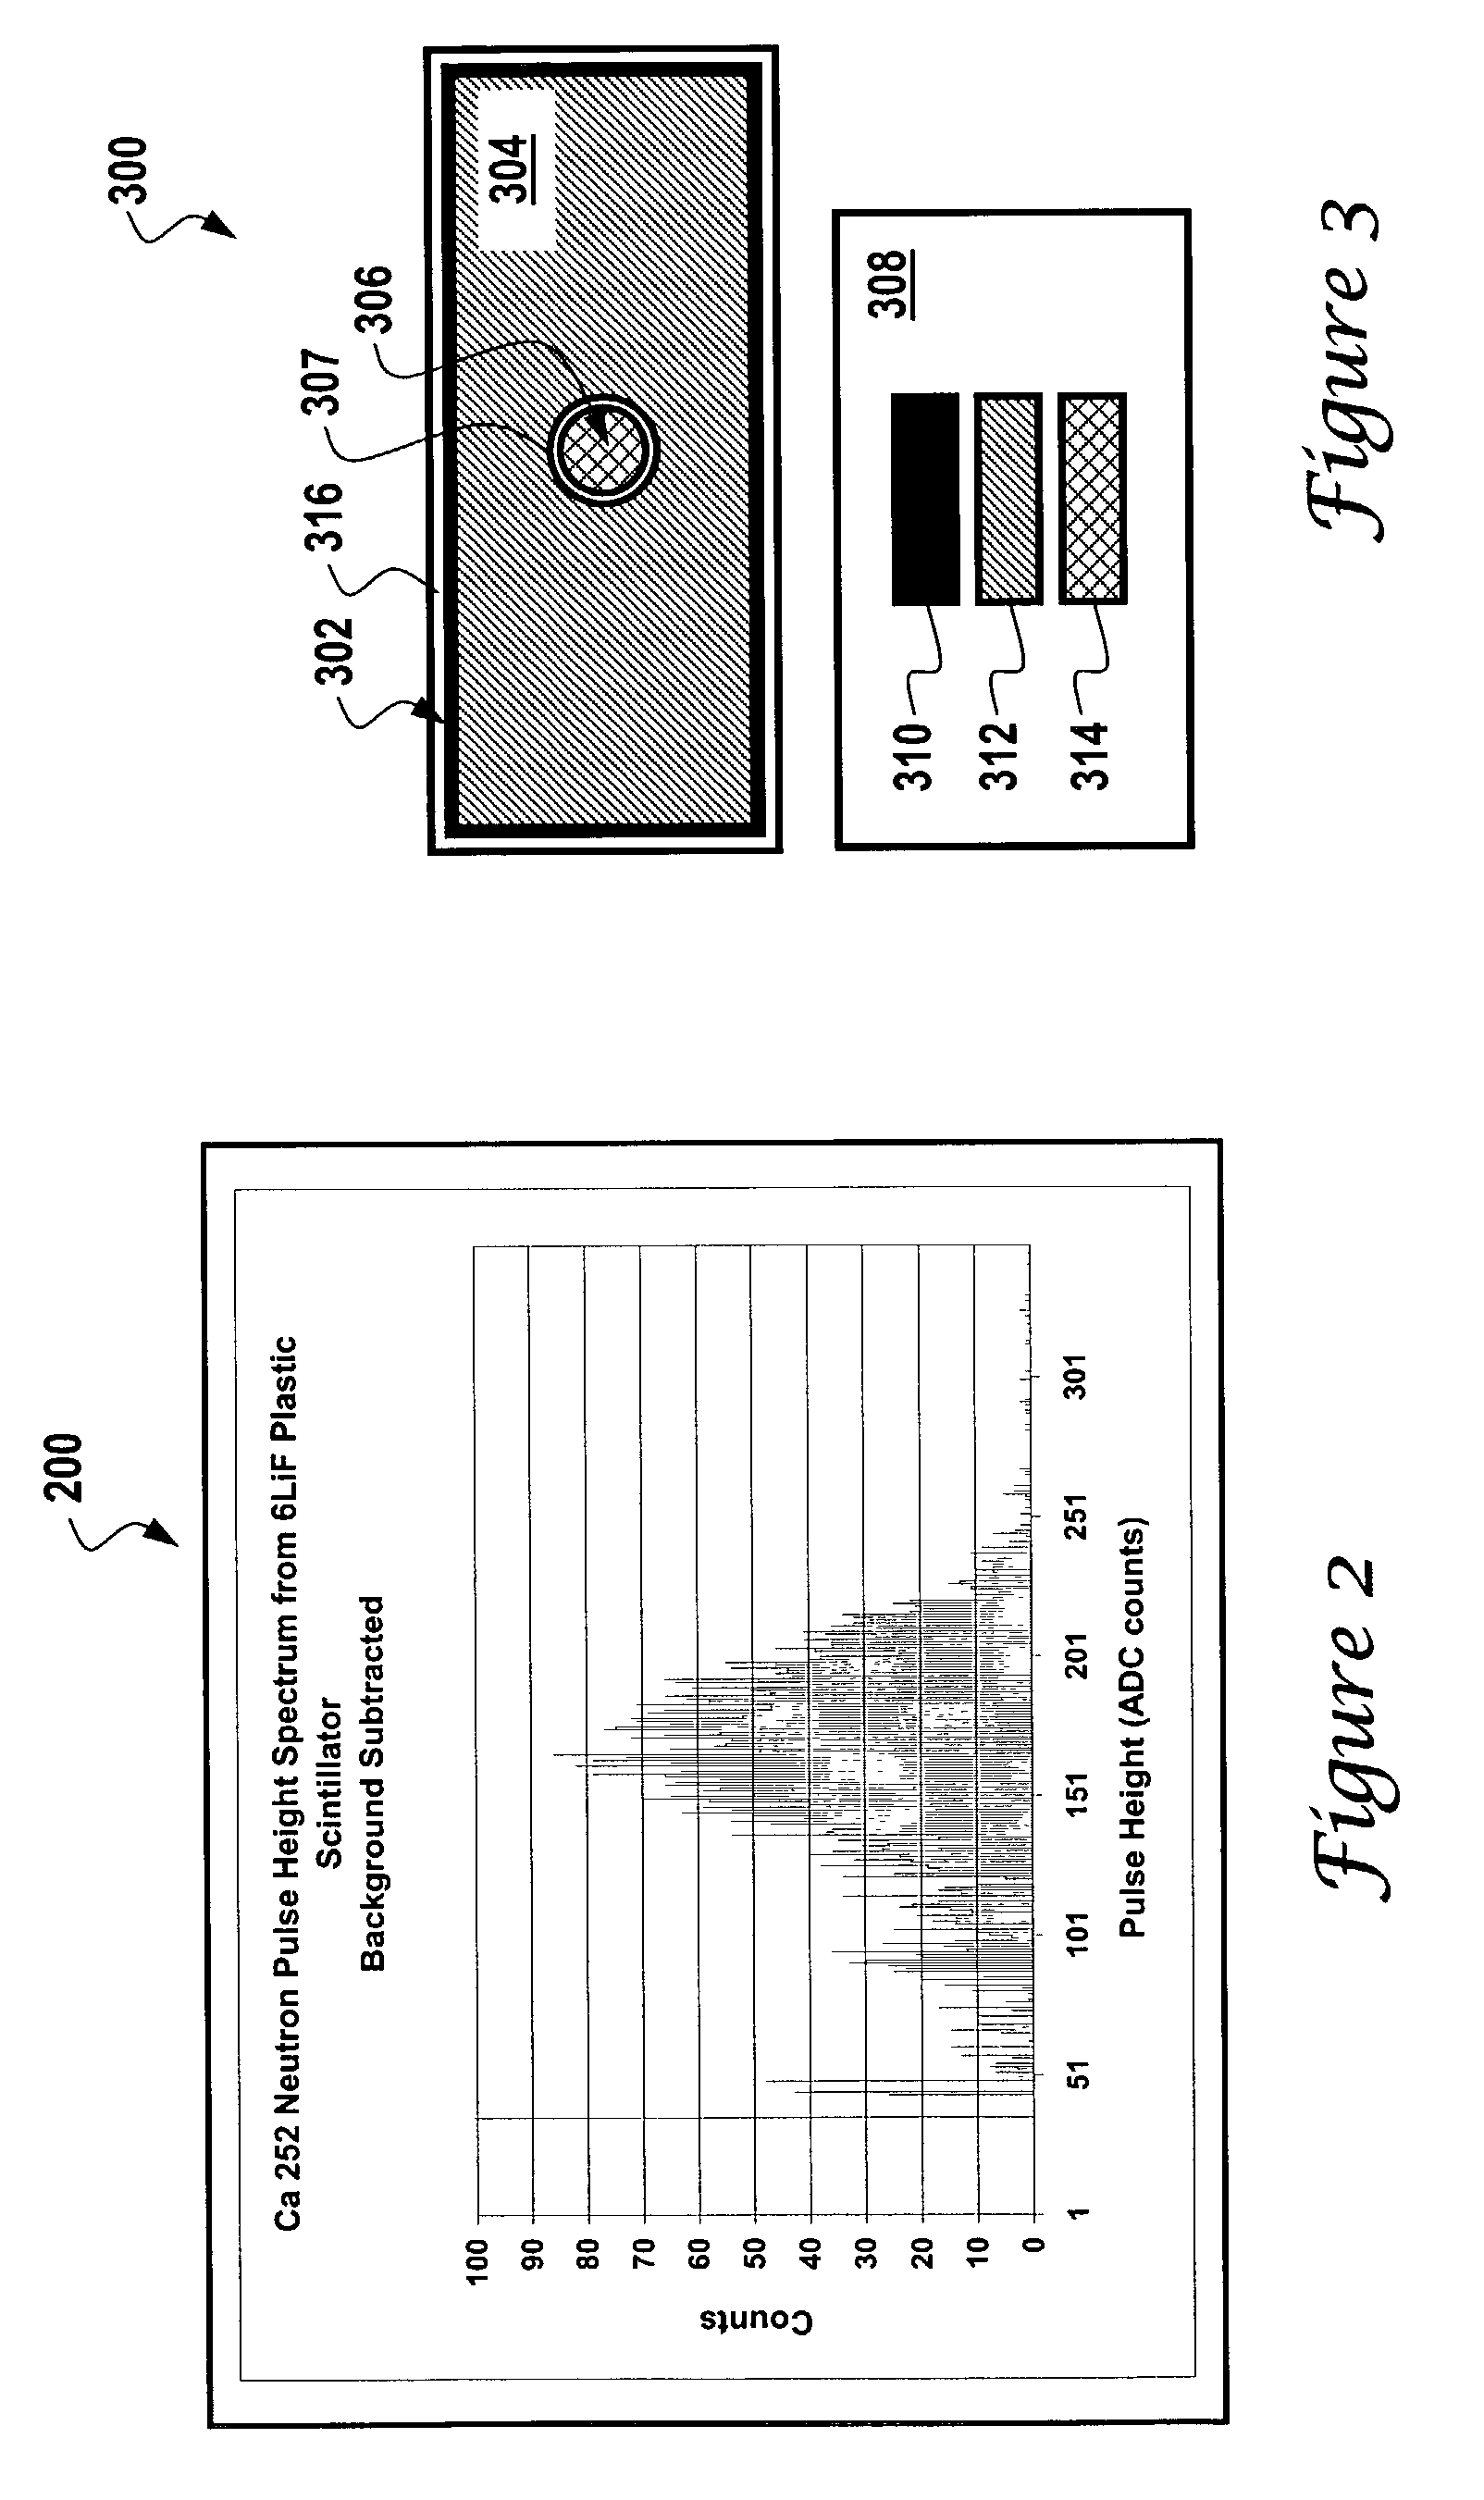 Systems and methods for detecting x-rays